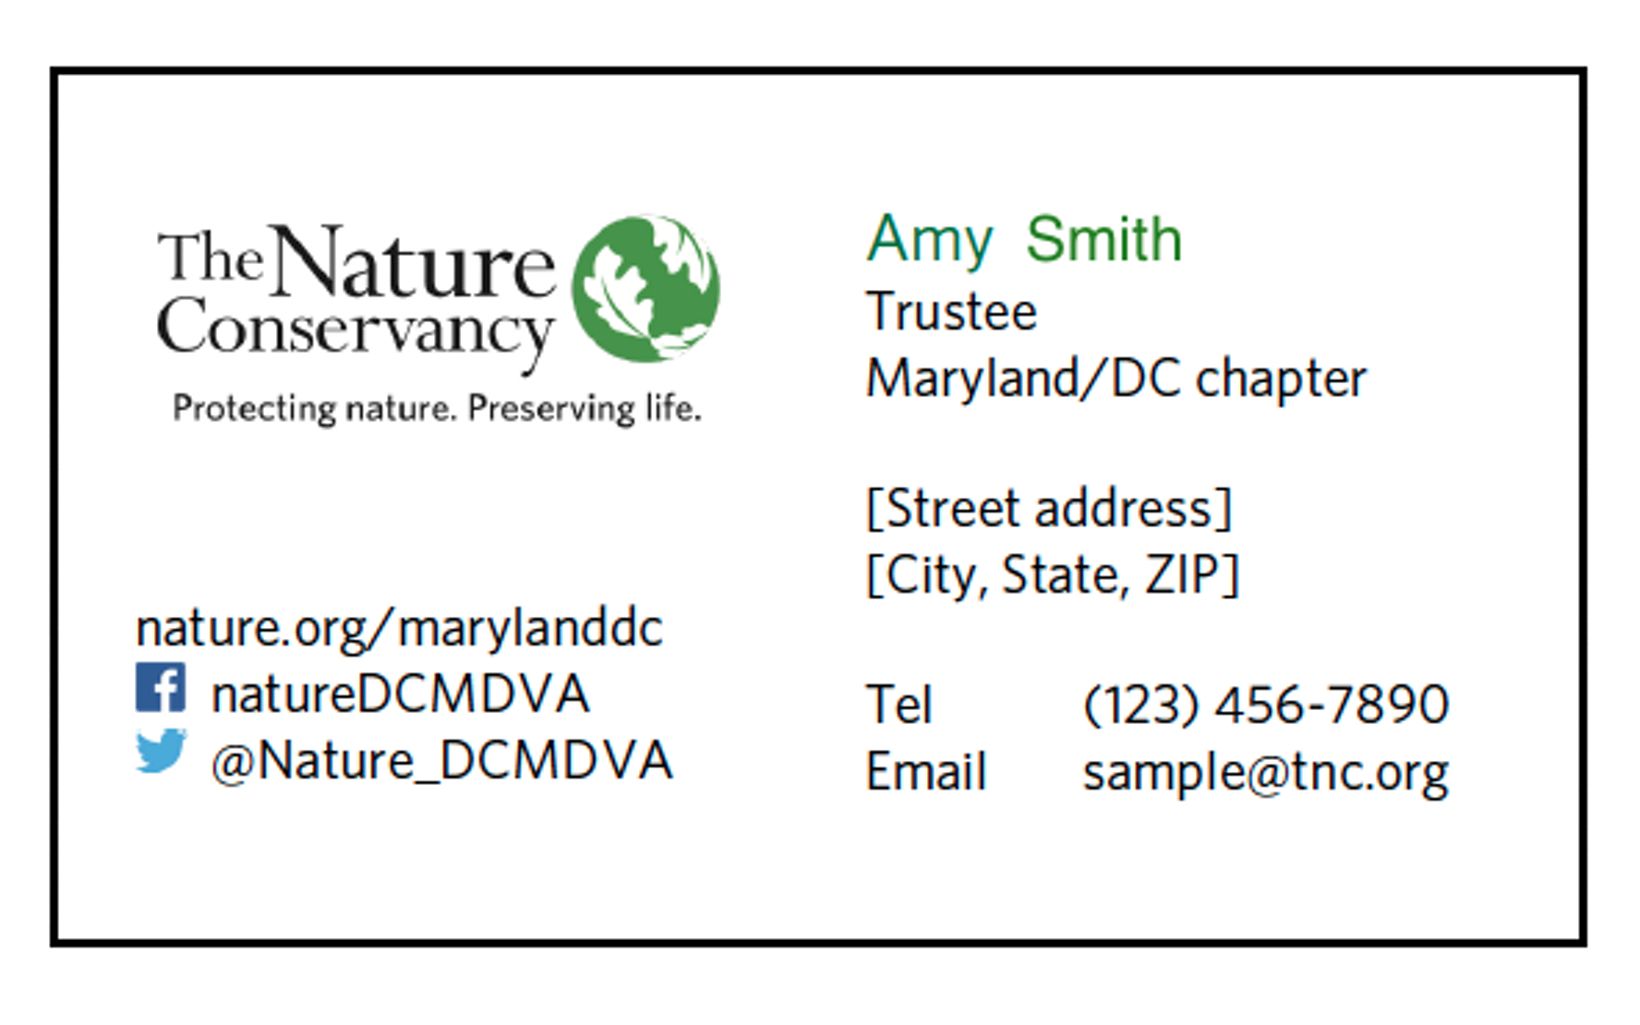 nature.org/marylanddc vanity URL Business card design for Maryland/DC trustees including chapter vanity URL.  